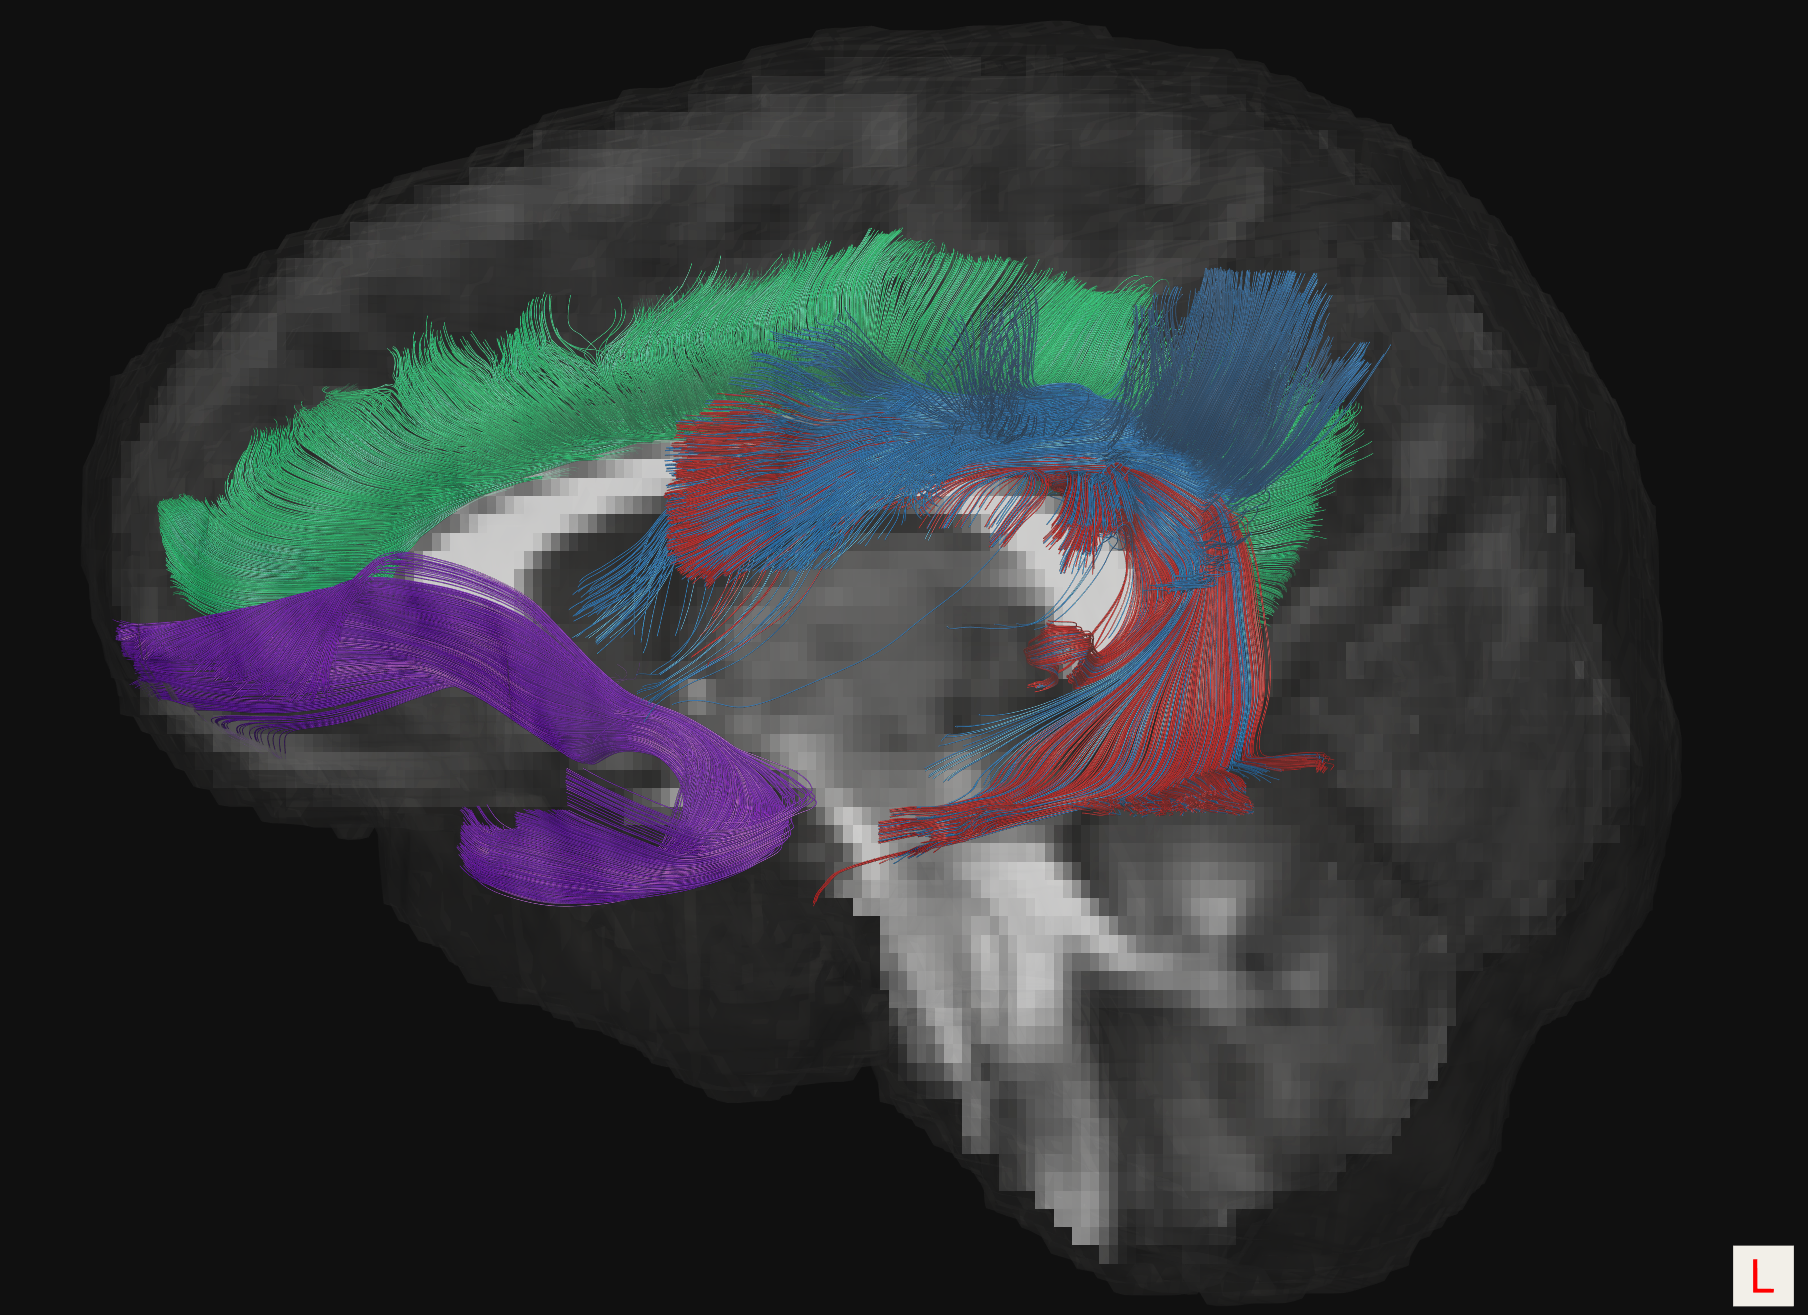 3D tractography